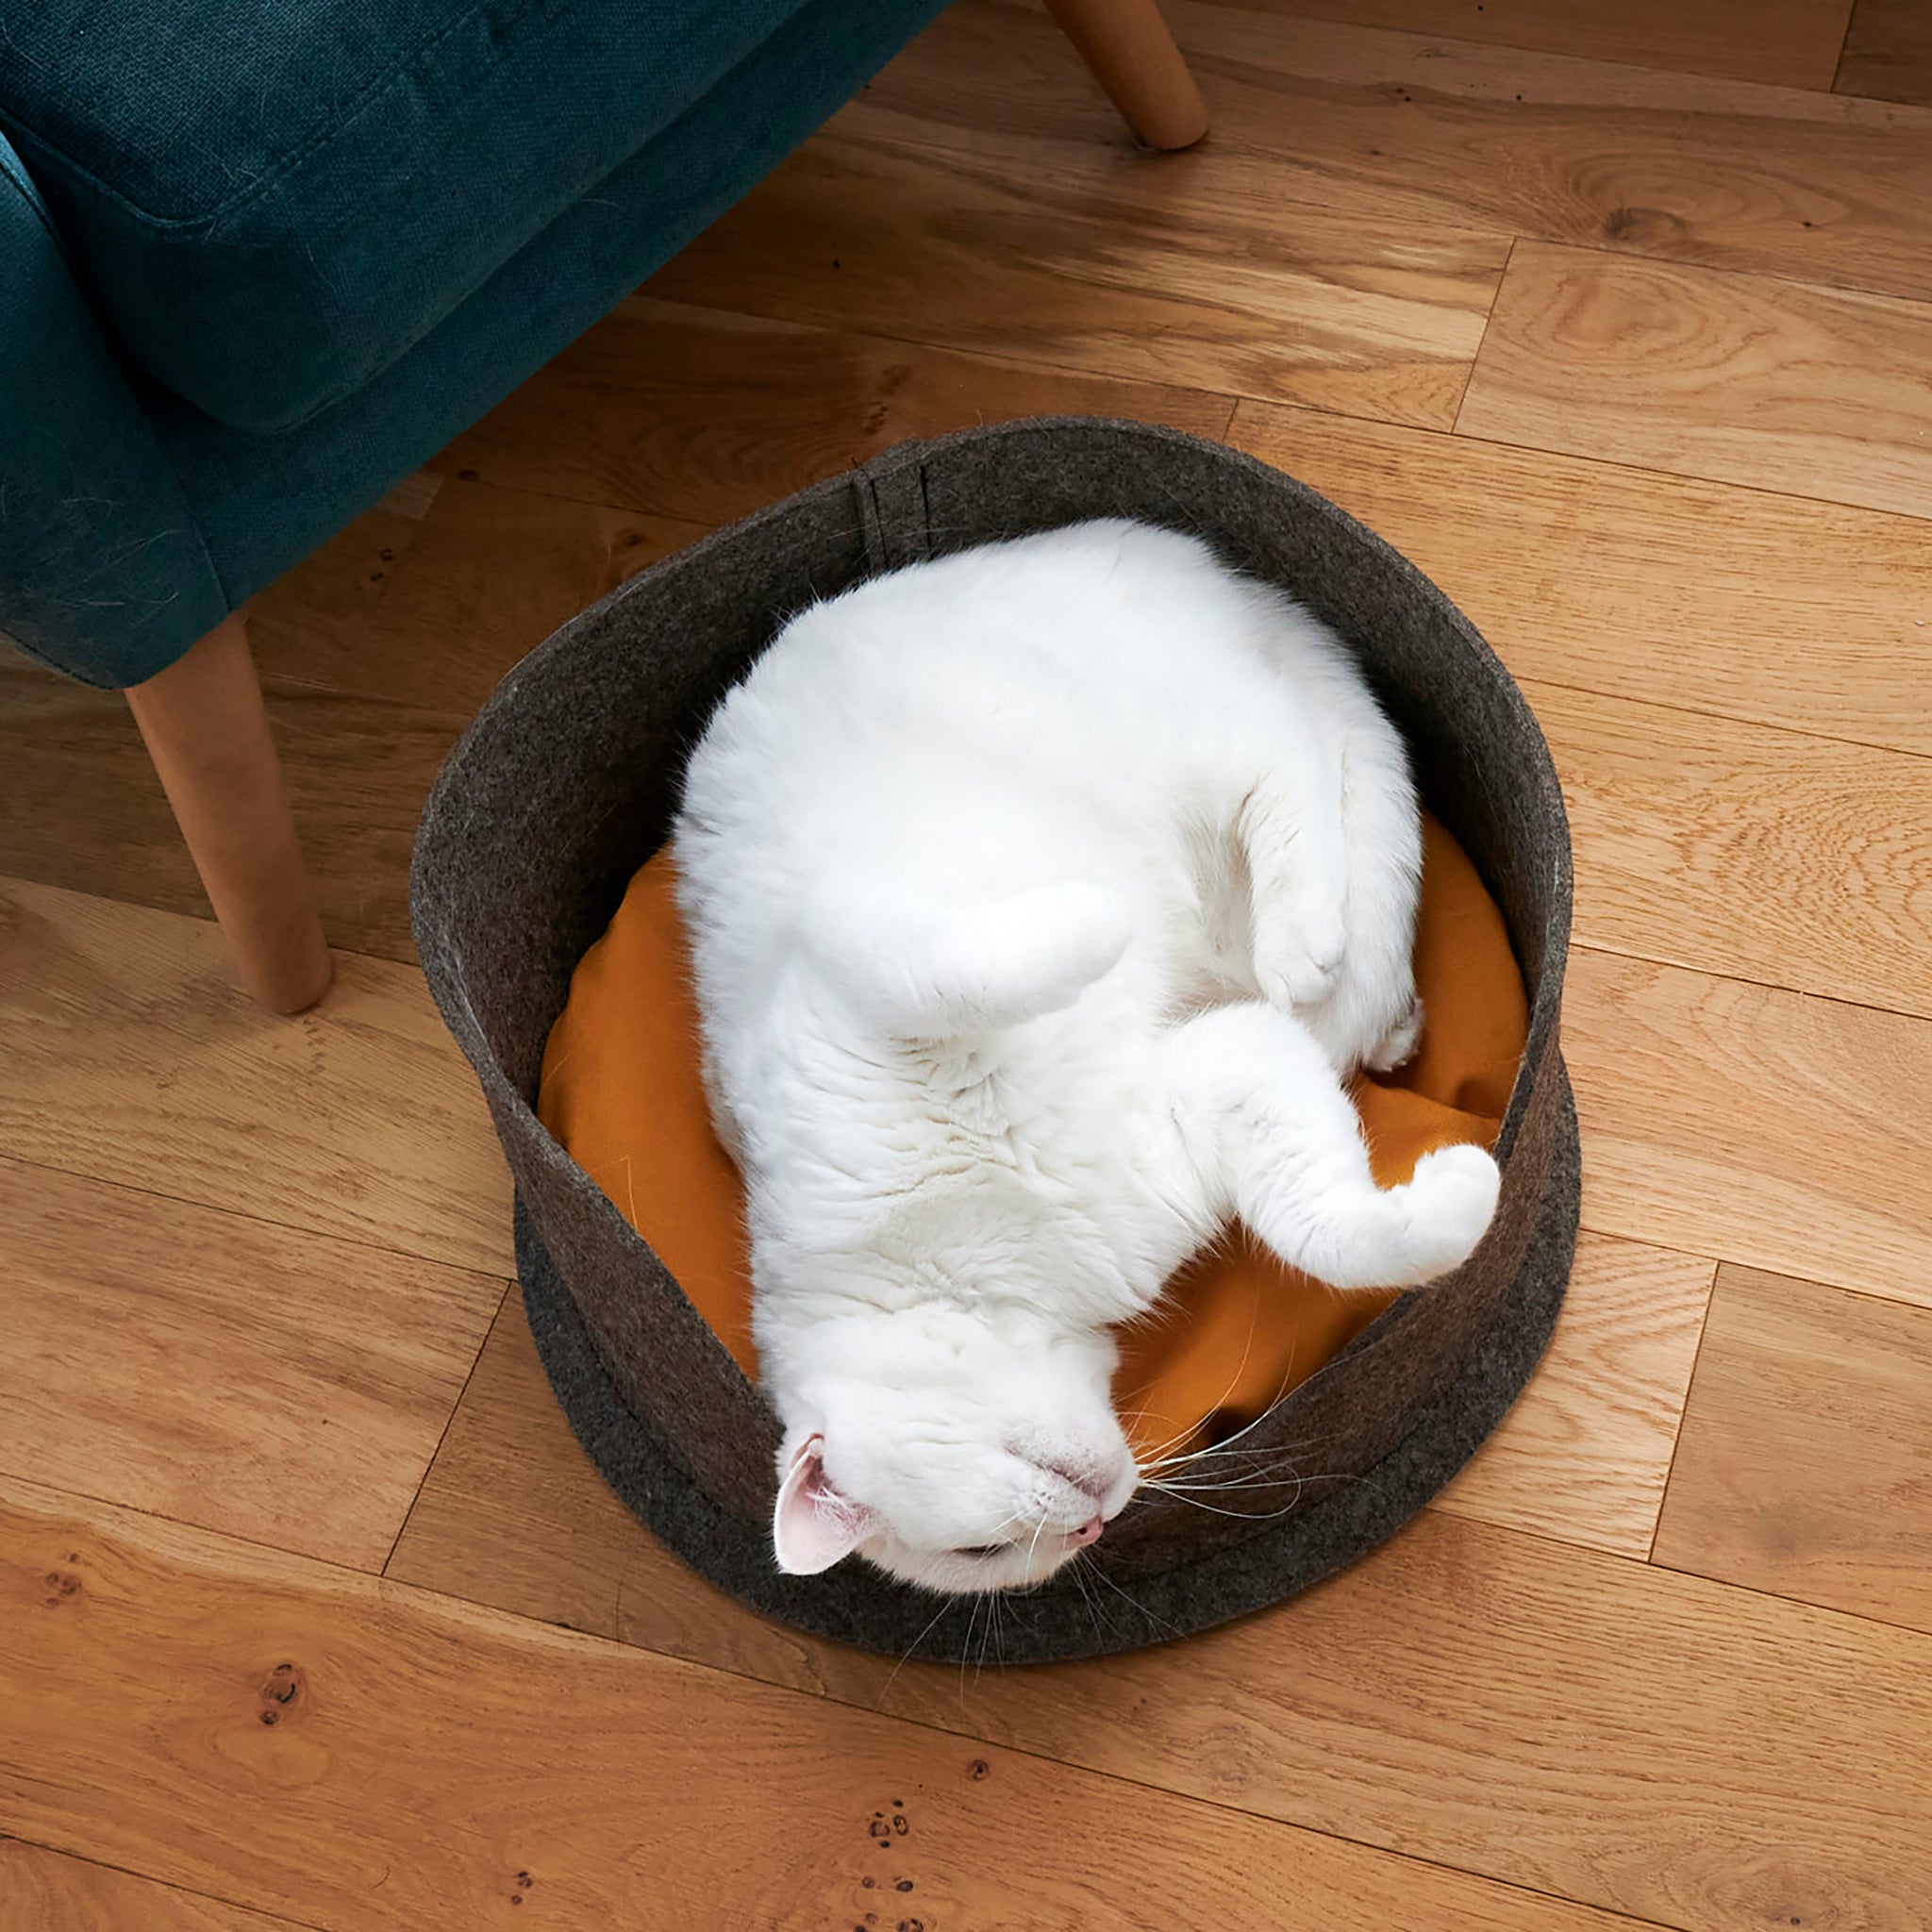 A white cat lays upside down inside a Chimney Sheep PetSnug felted wool cat bed. The cat sits upon a yellow wool cushion. The cat bed is placed on a wooden floor